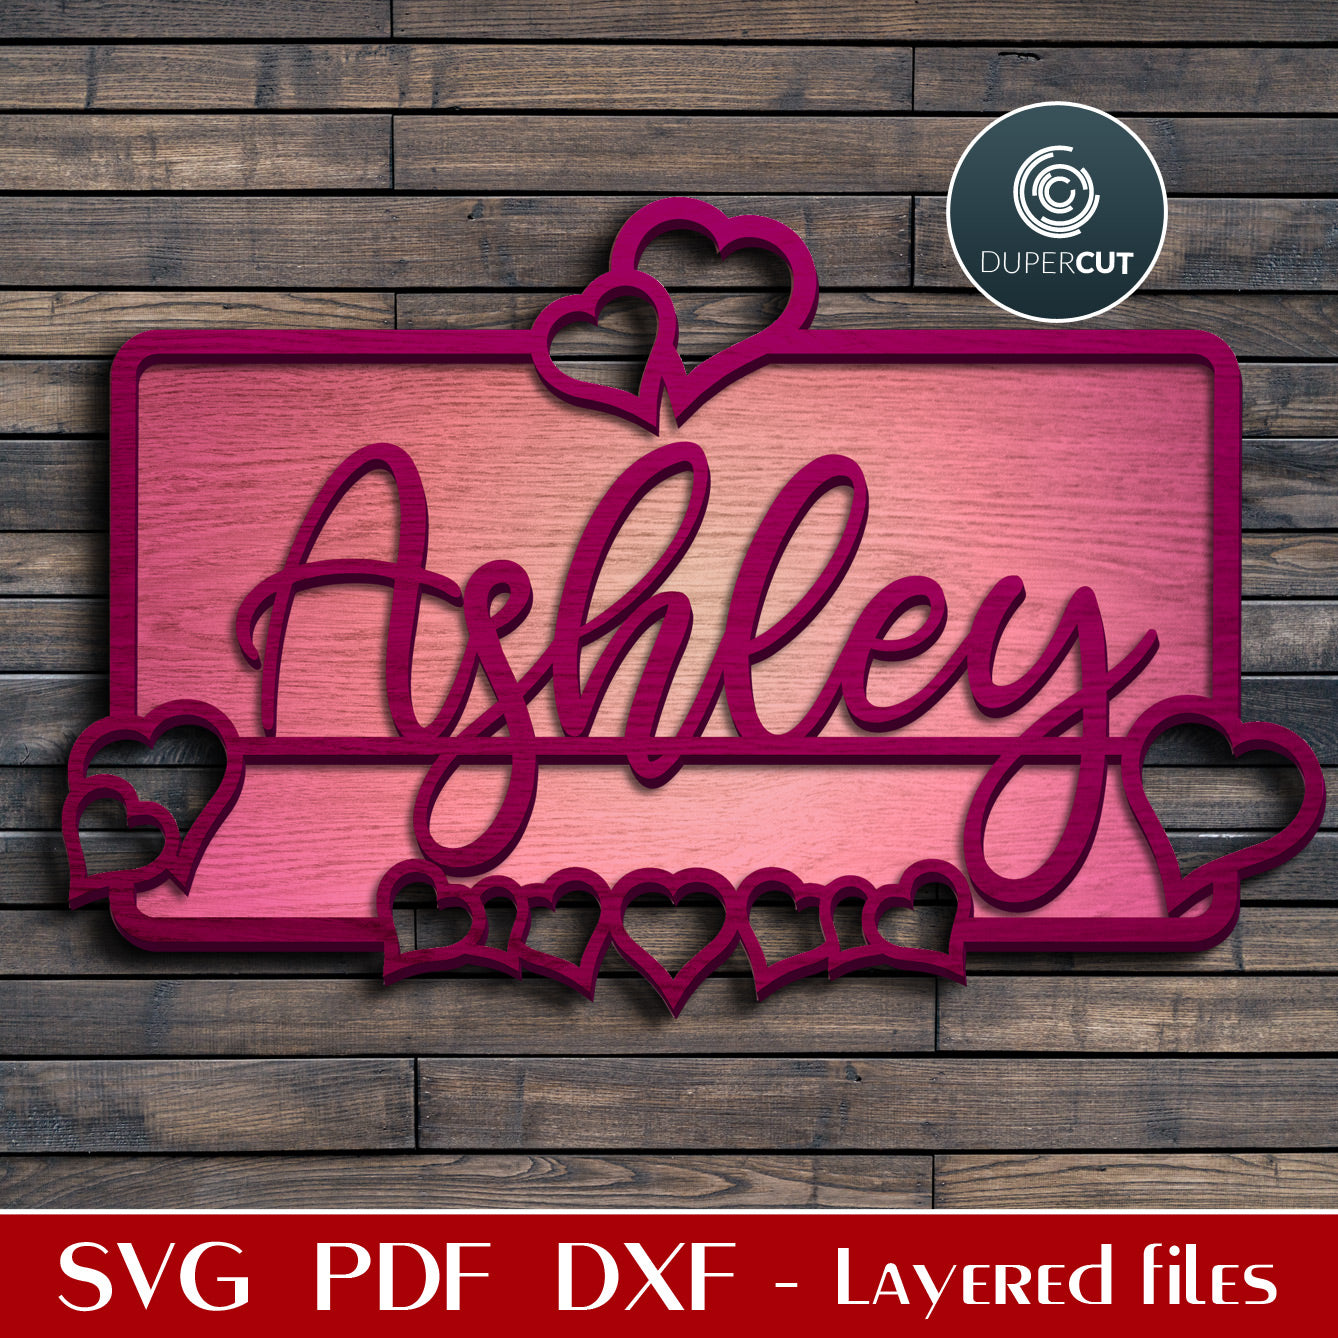 Cute custom name sign with hearts for girls - personalized sign - SVG DXF layered cutting files for Glowforge, Cricut, Silhouette Cameo, CNC plasma machines by DuperCut